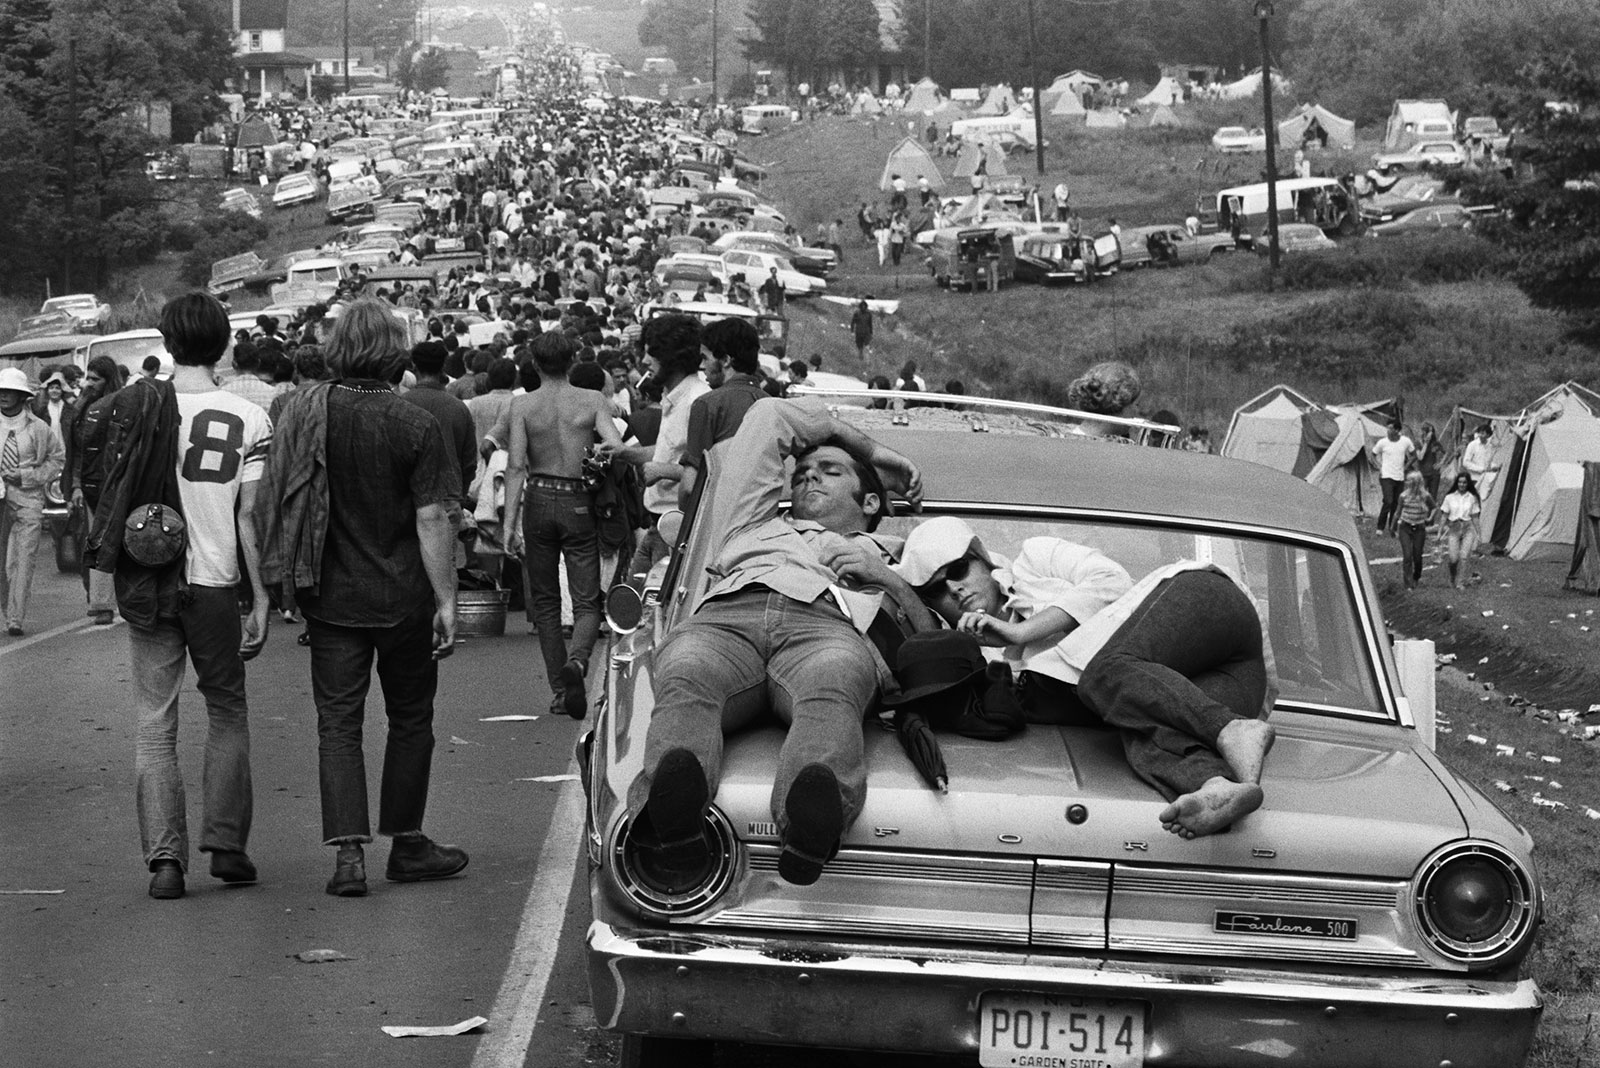 On the way to Woodstock, 1969.